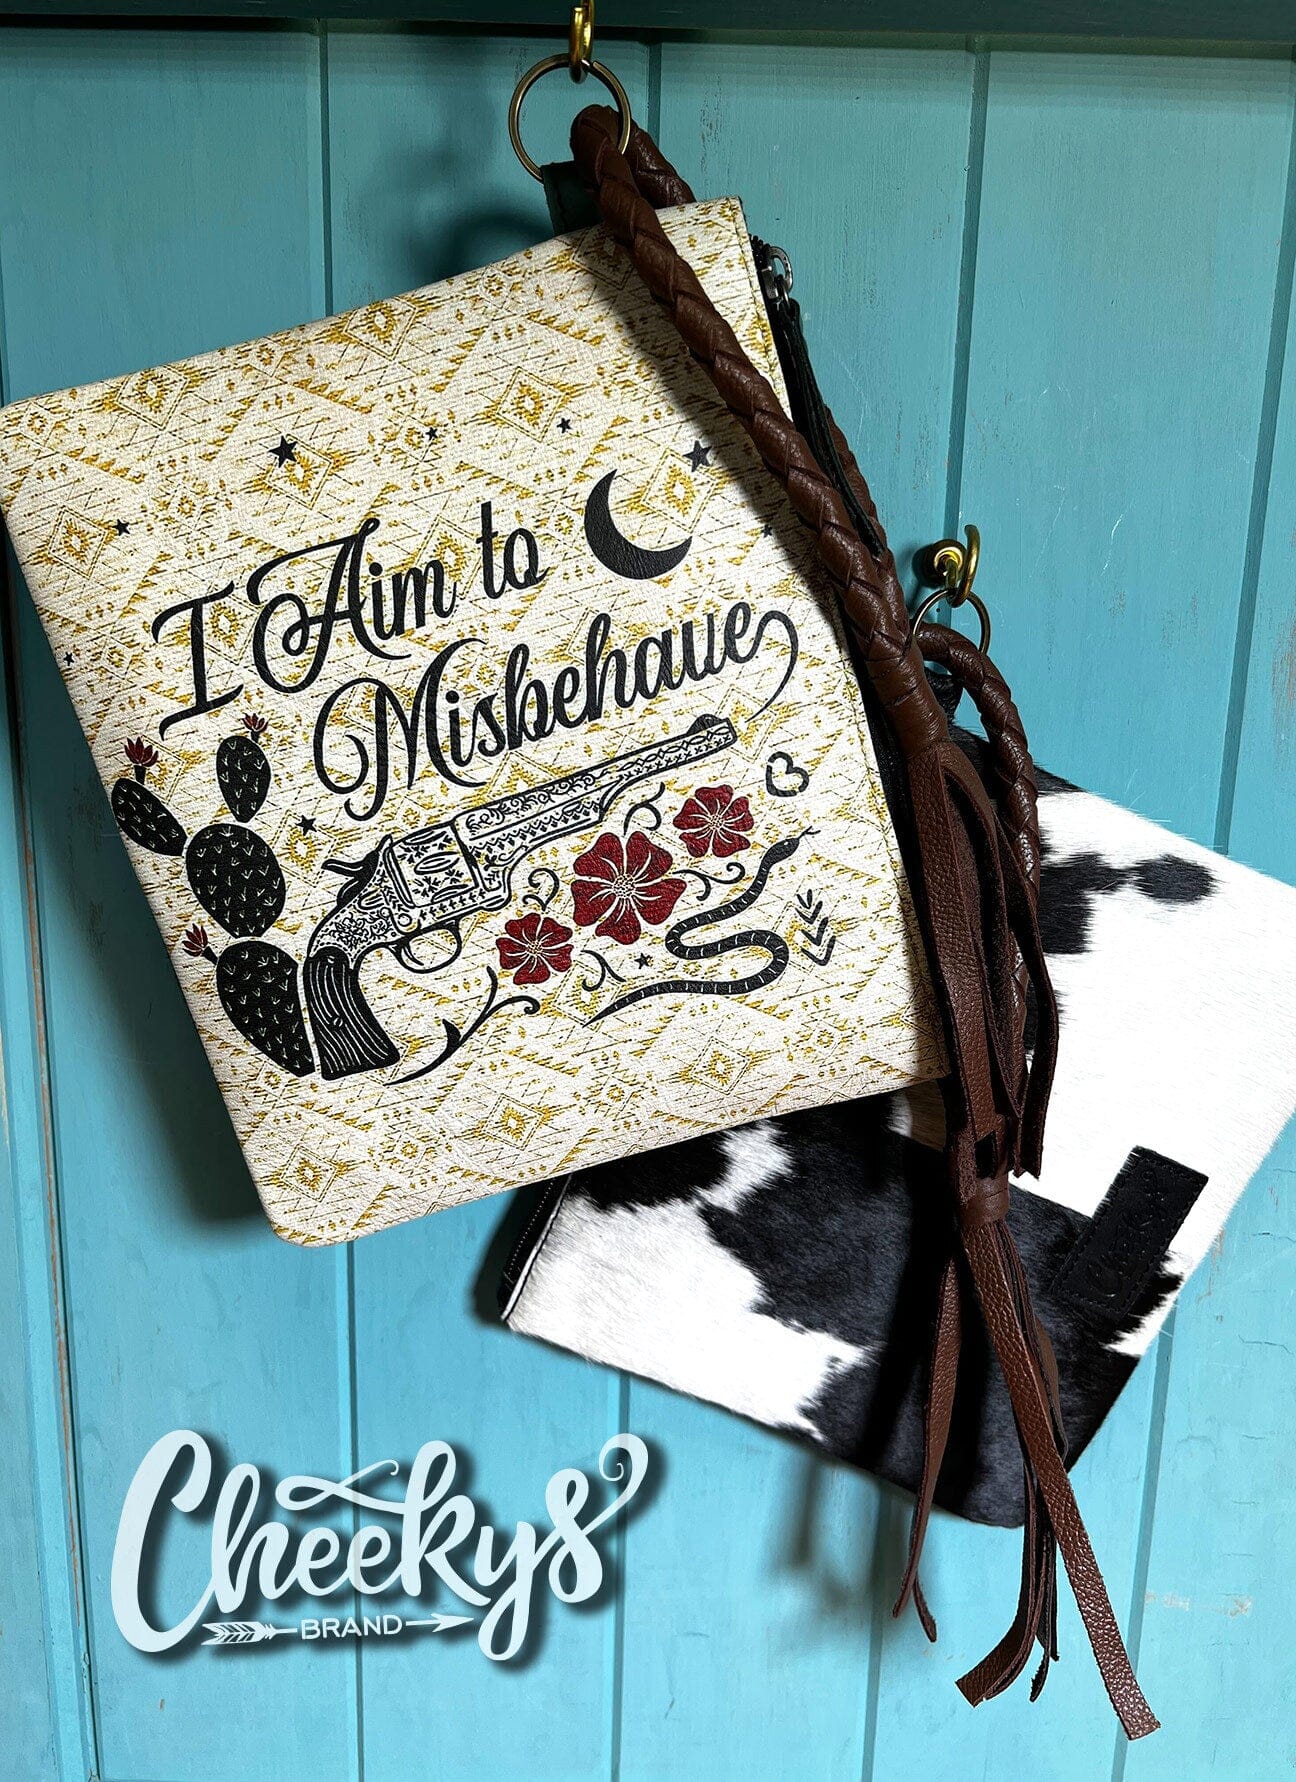 I Ain To Misbehave Wristlet Cheekys Brand NATURAL 